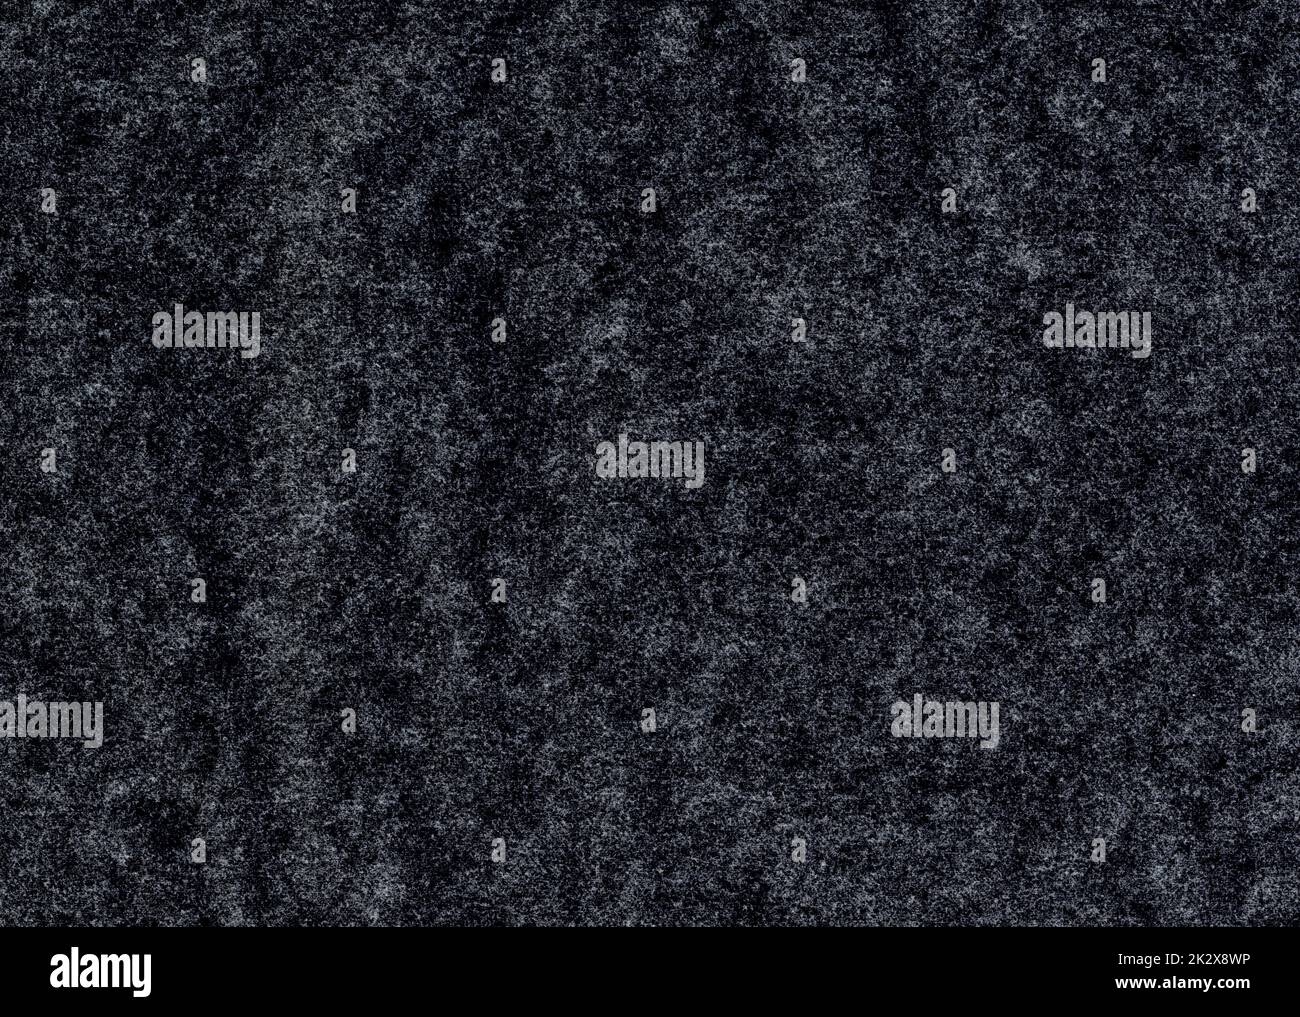 High detail large image of rough, uncoated, black, gray paper texture background scan grunge wallpaper pronounced fiber grain and particles distinguished black and white dirt pattern Stock Photo